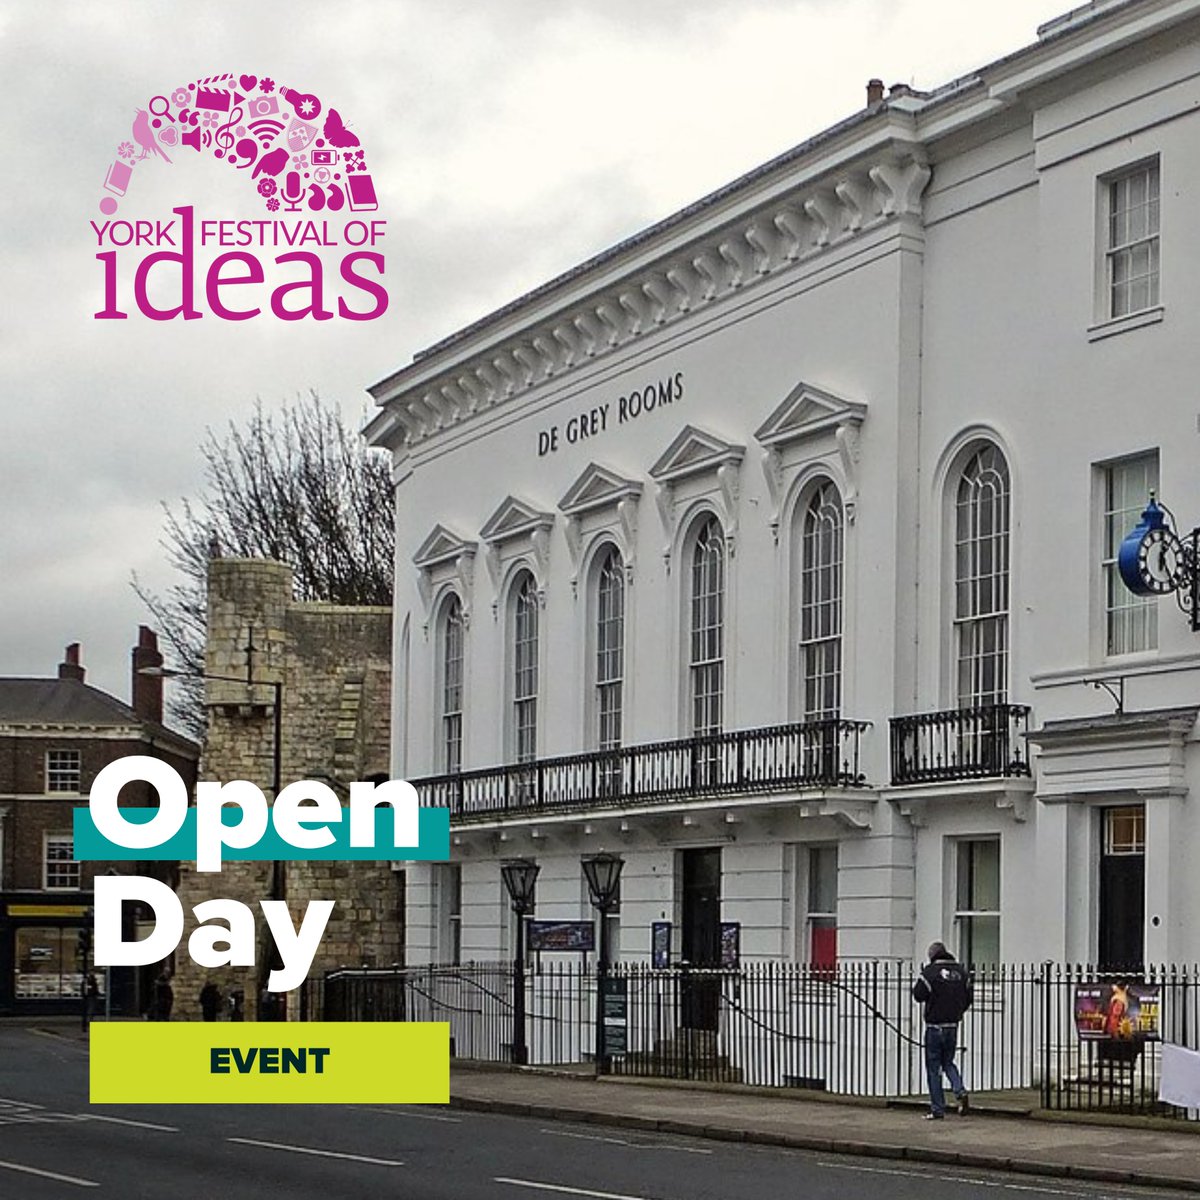 Join us for an Open Day on June 5th for @YorkFestofIdeas 🎉 Chat with CBA staff, try your hand at hands-on activities, and share your thoughts on what archaeology means to you. And what's a celebration without cake and goodies? Find out more here 👉 yorkfestivalofideas.com/2024/calendar/…